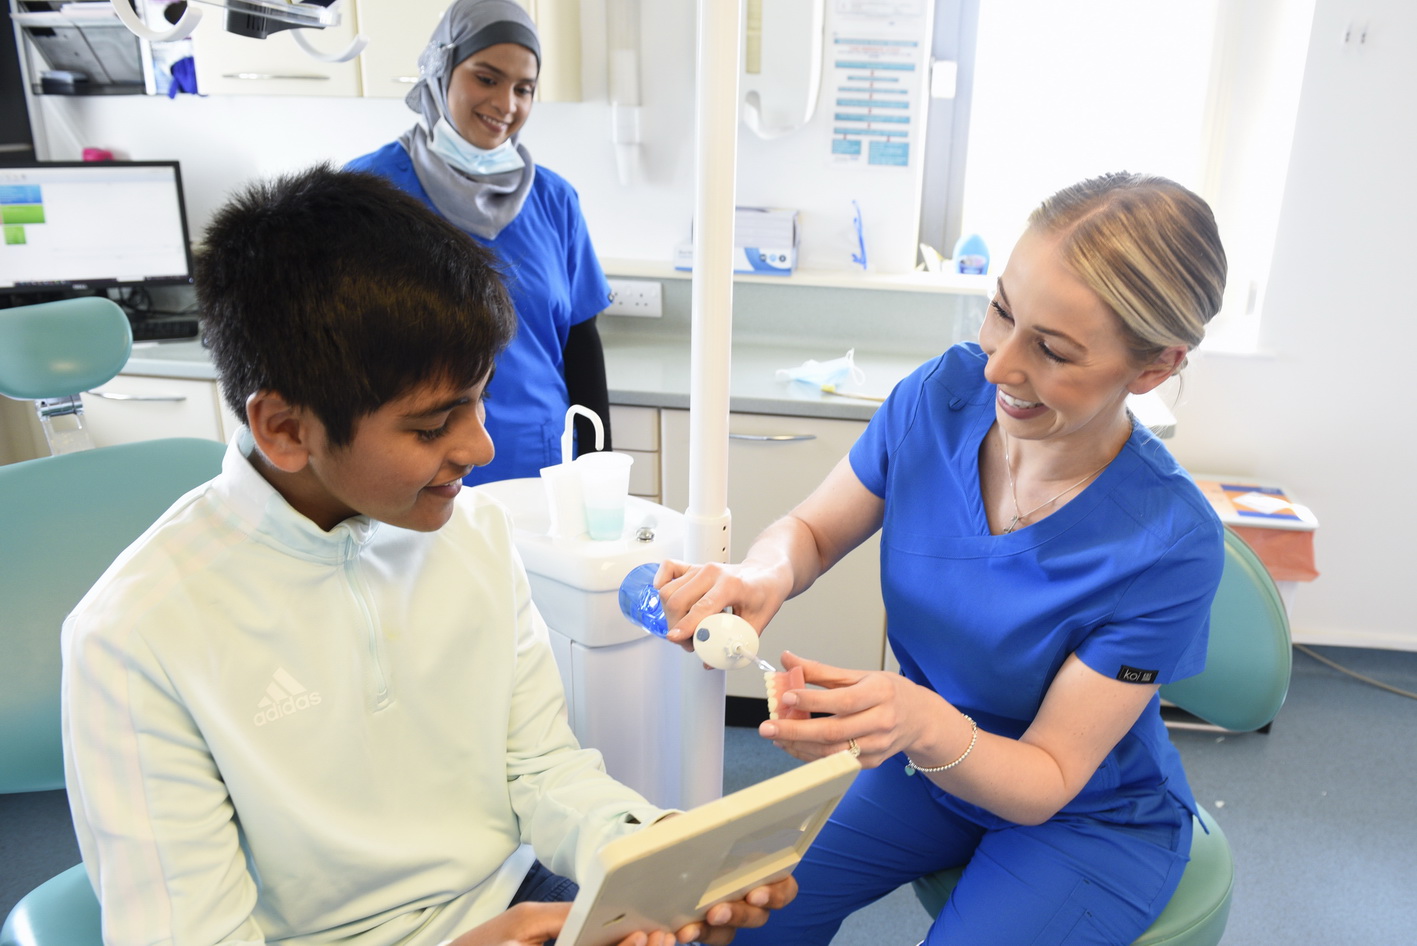 Liverpool photographer works at a dentist